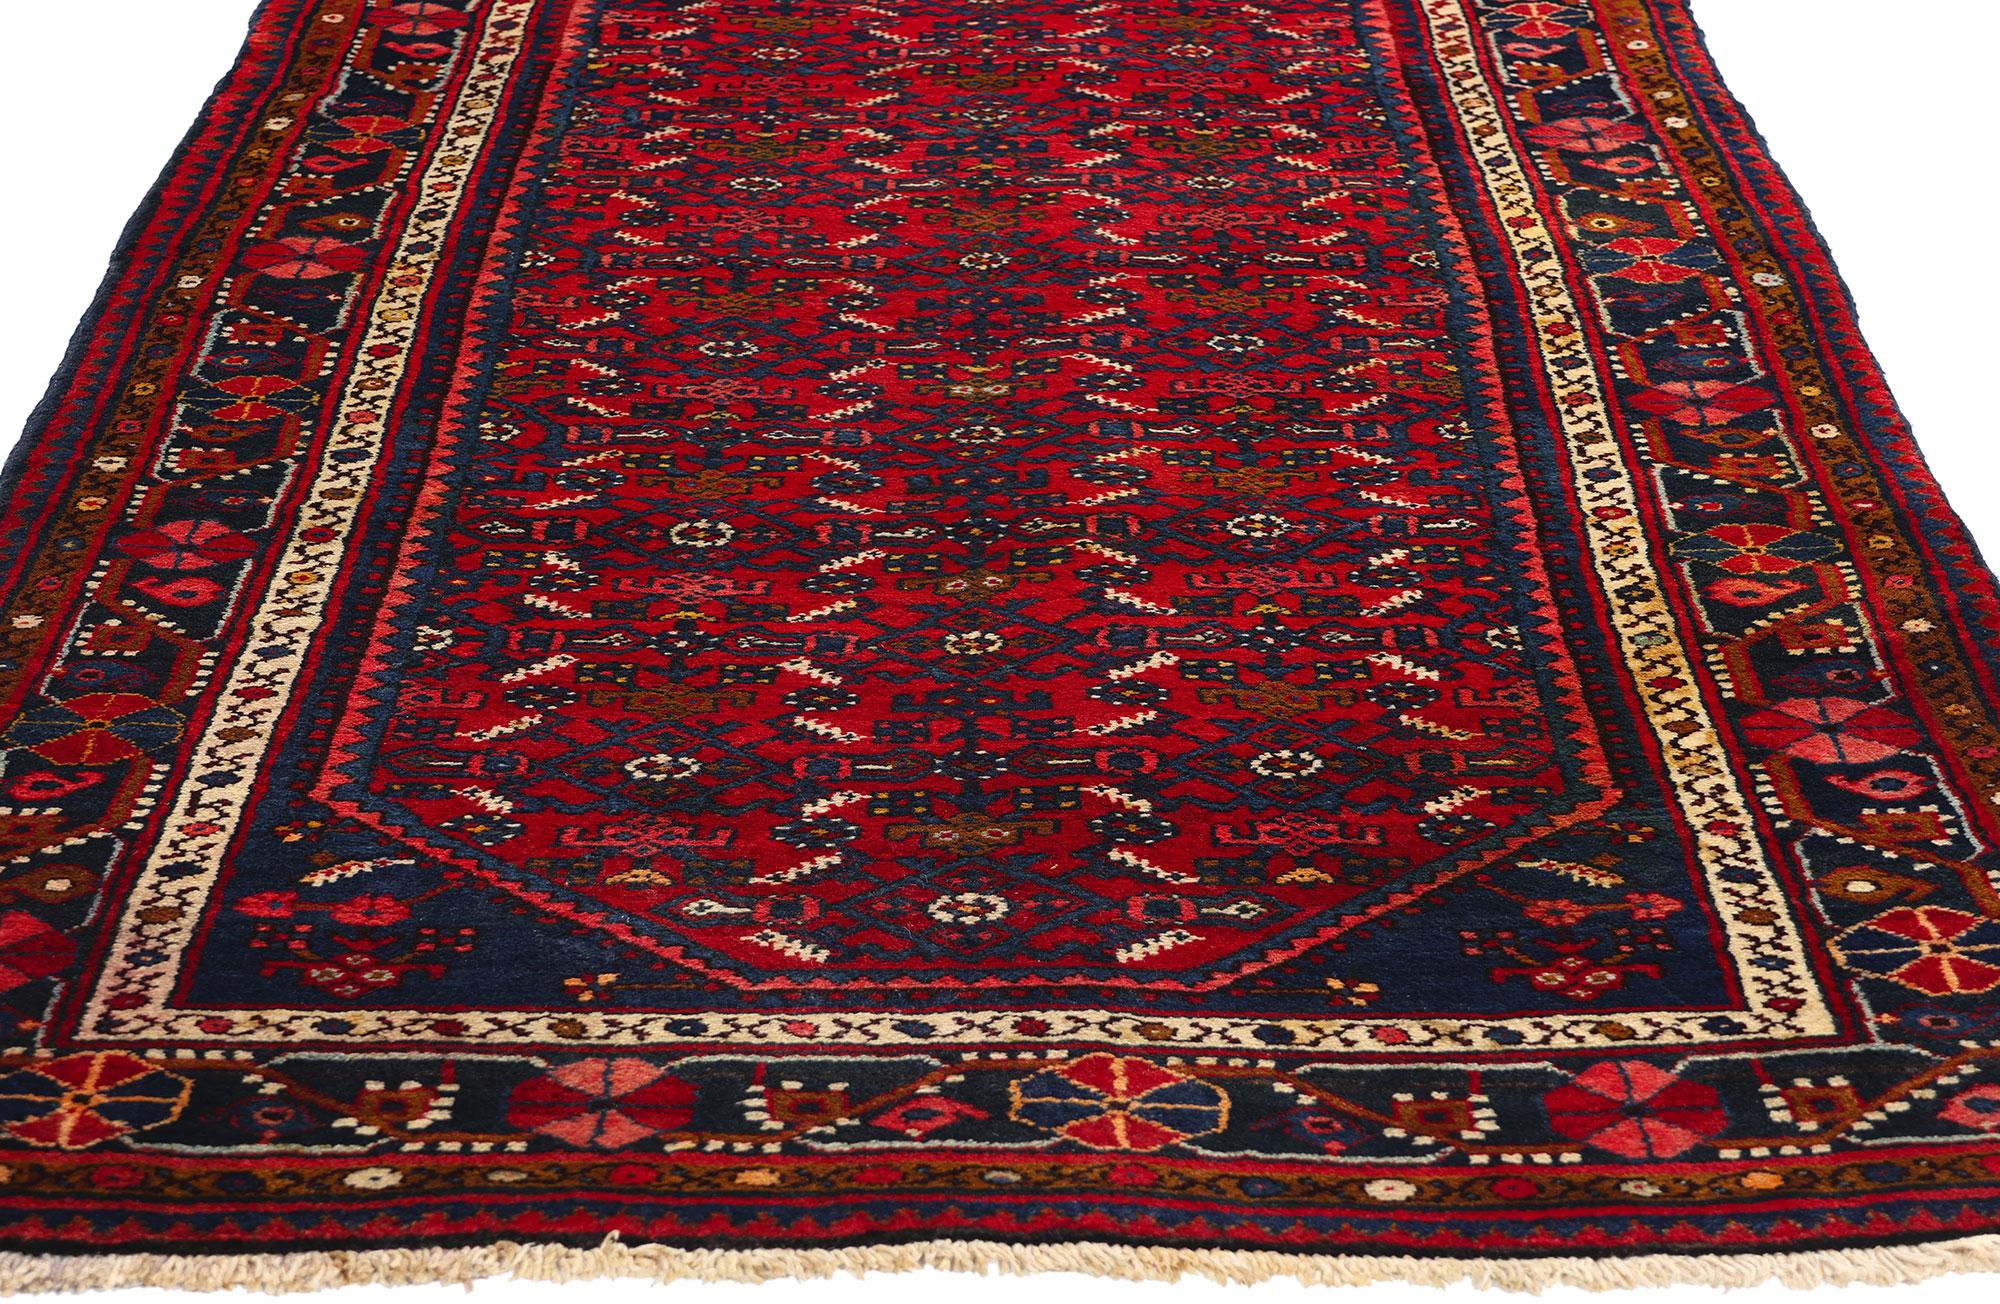 Vintage Persian Hamadan Rug Hussainabad Herati Carpet Runner In Good Condition For Sale In Dallas, TX